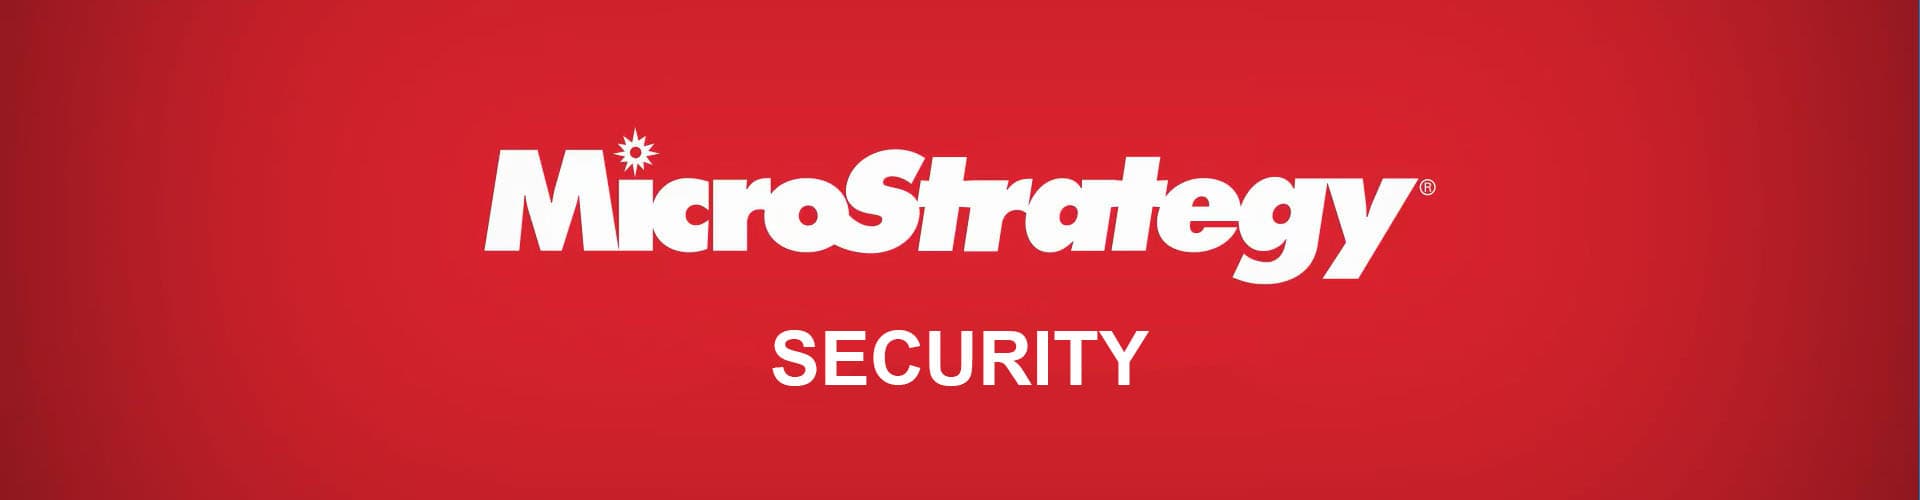 MicroStrategy Security